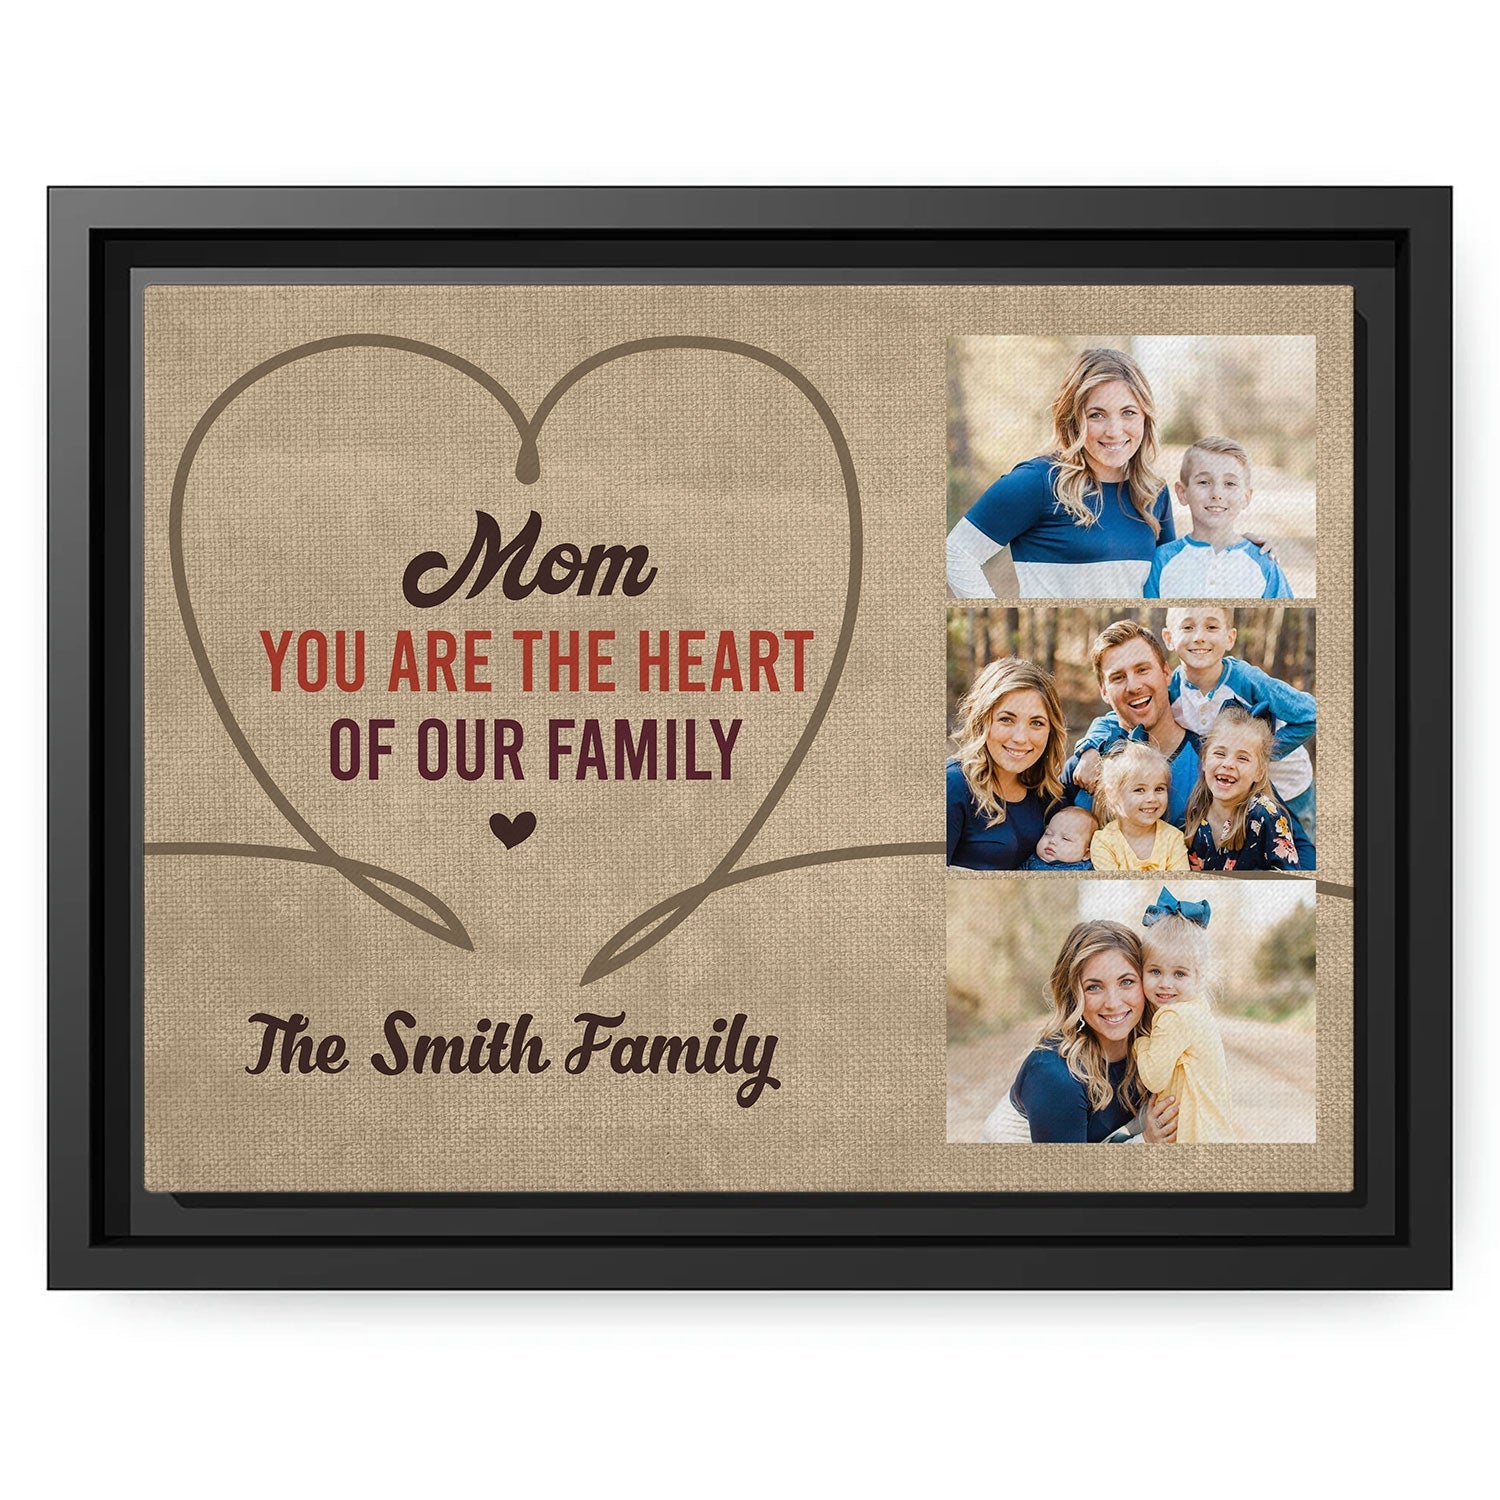 Mom You Are The Heart Of Our Family - Personalized  gift For Mom - Custom Canvas Print - MyMindfulGifts